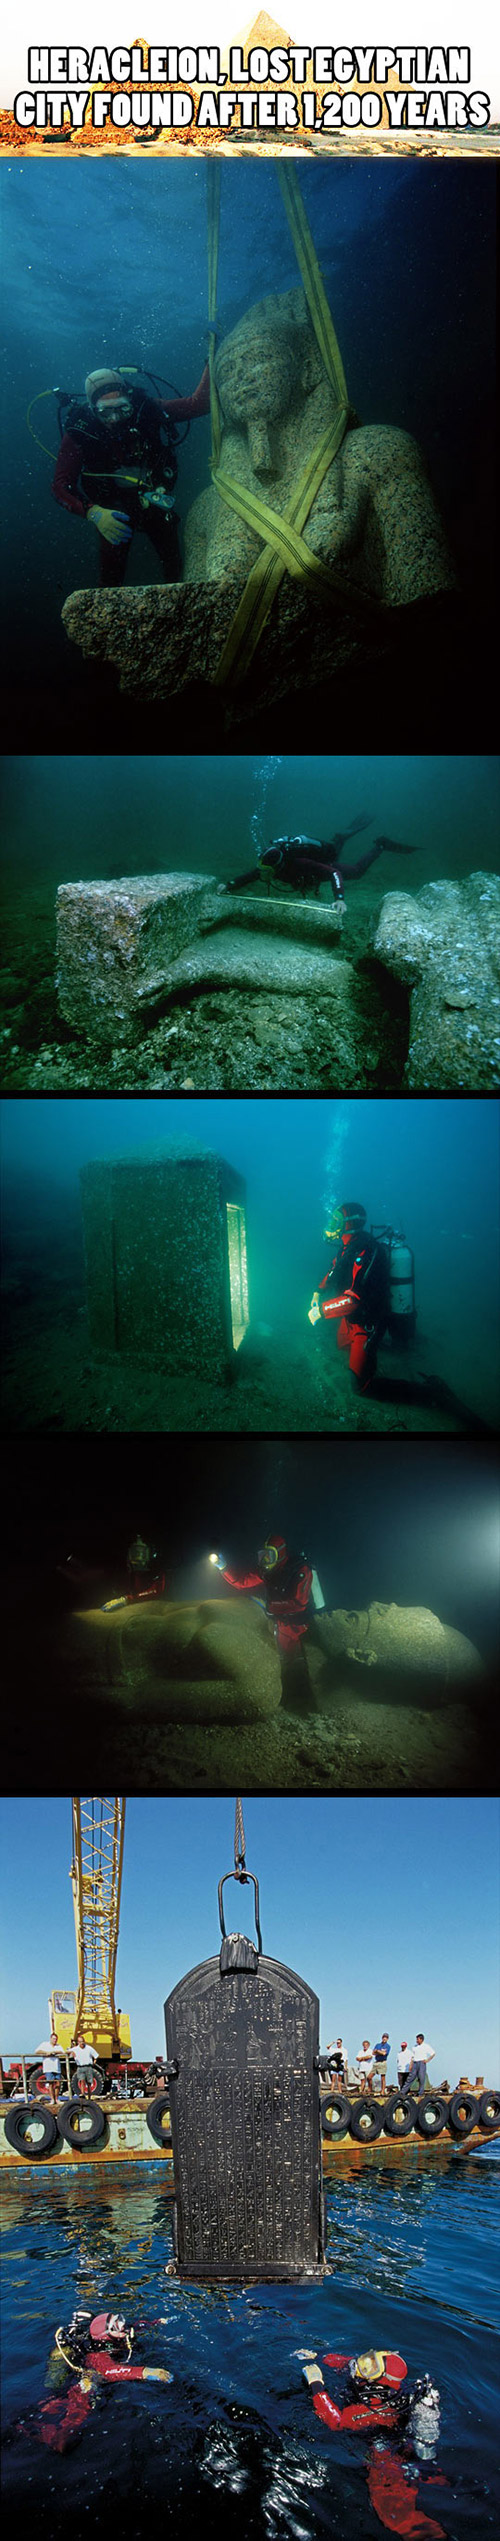 Heracleion Lost Egyptian City